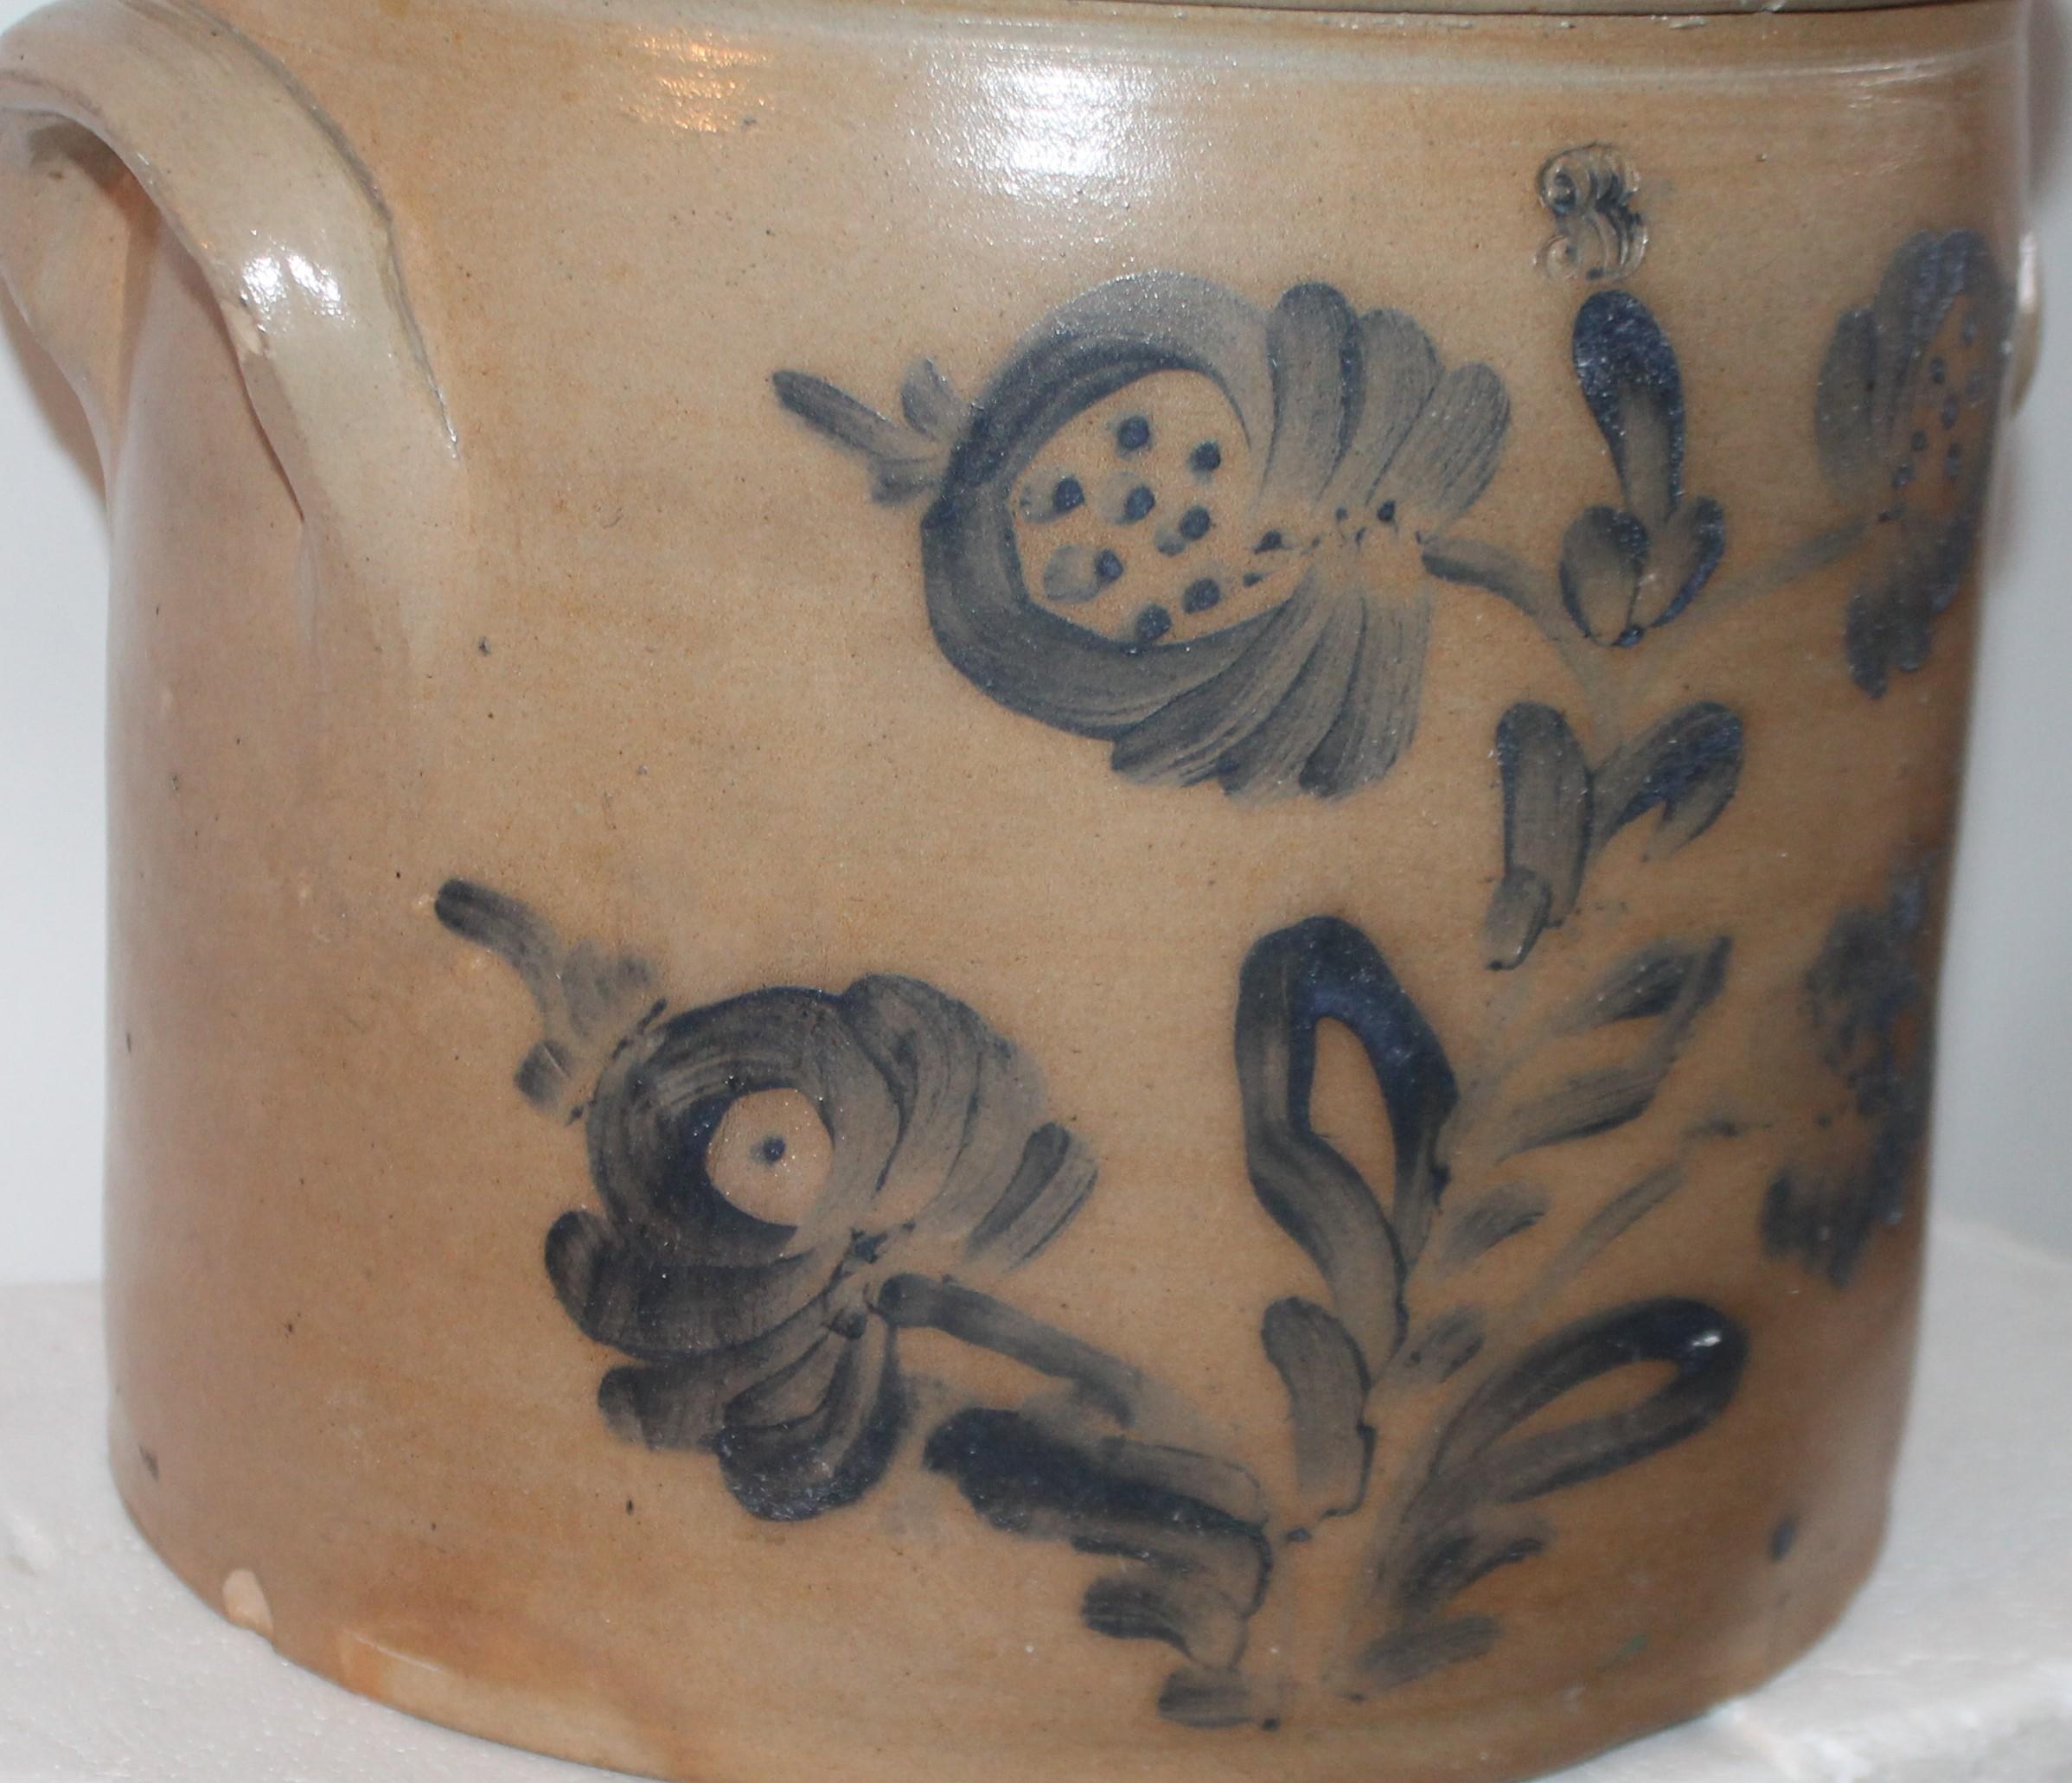 This fine double handled blue decorated stone ware crock is in good condition with minor chip on interior. There is an embossed three above the hand painted and decorated flowers on the face of the crock.